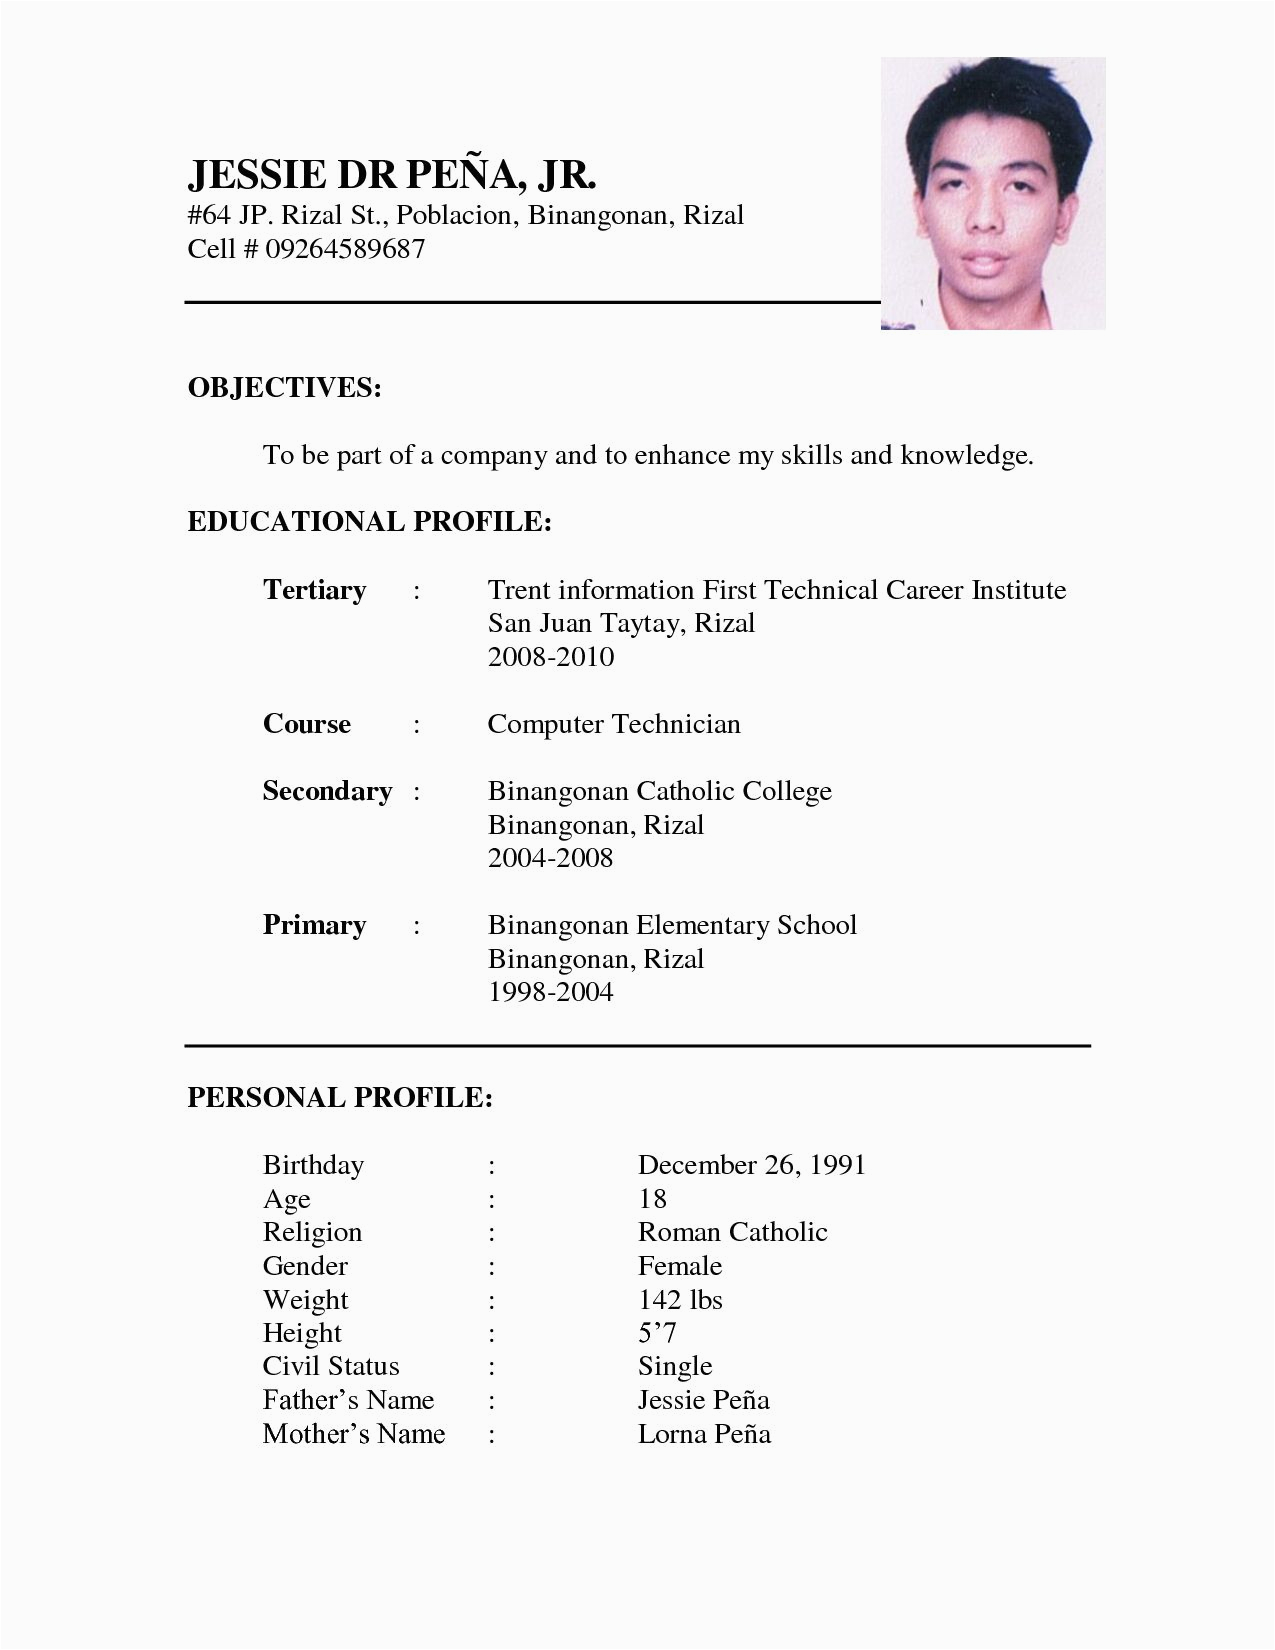 Sample Of Simple Resume for Job Application Resume Samples for Job Application Free Downloadable